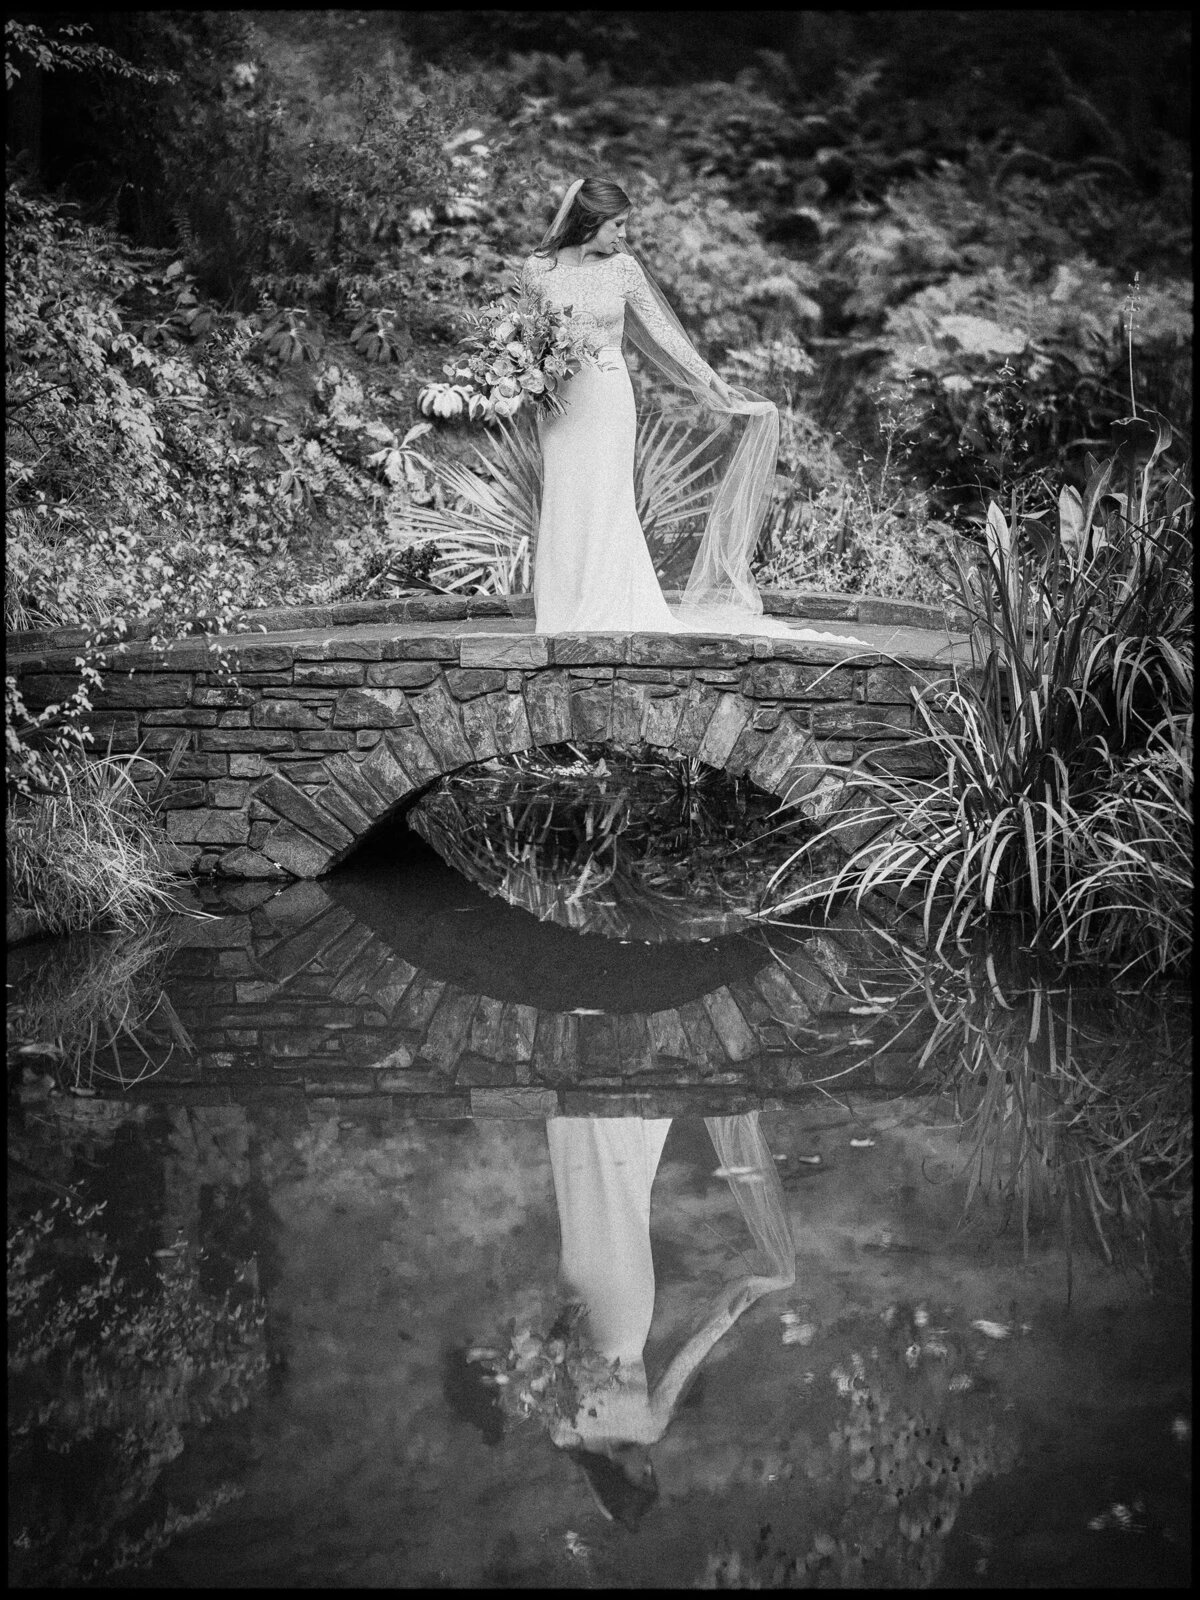 Image of a bride on a bridge reflecting in a small pond